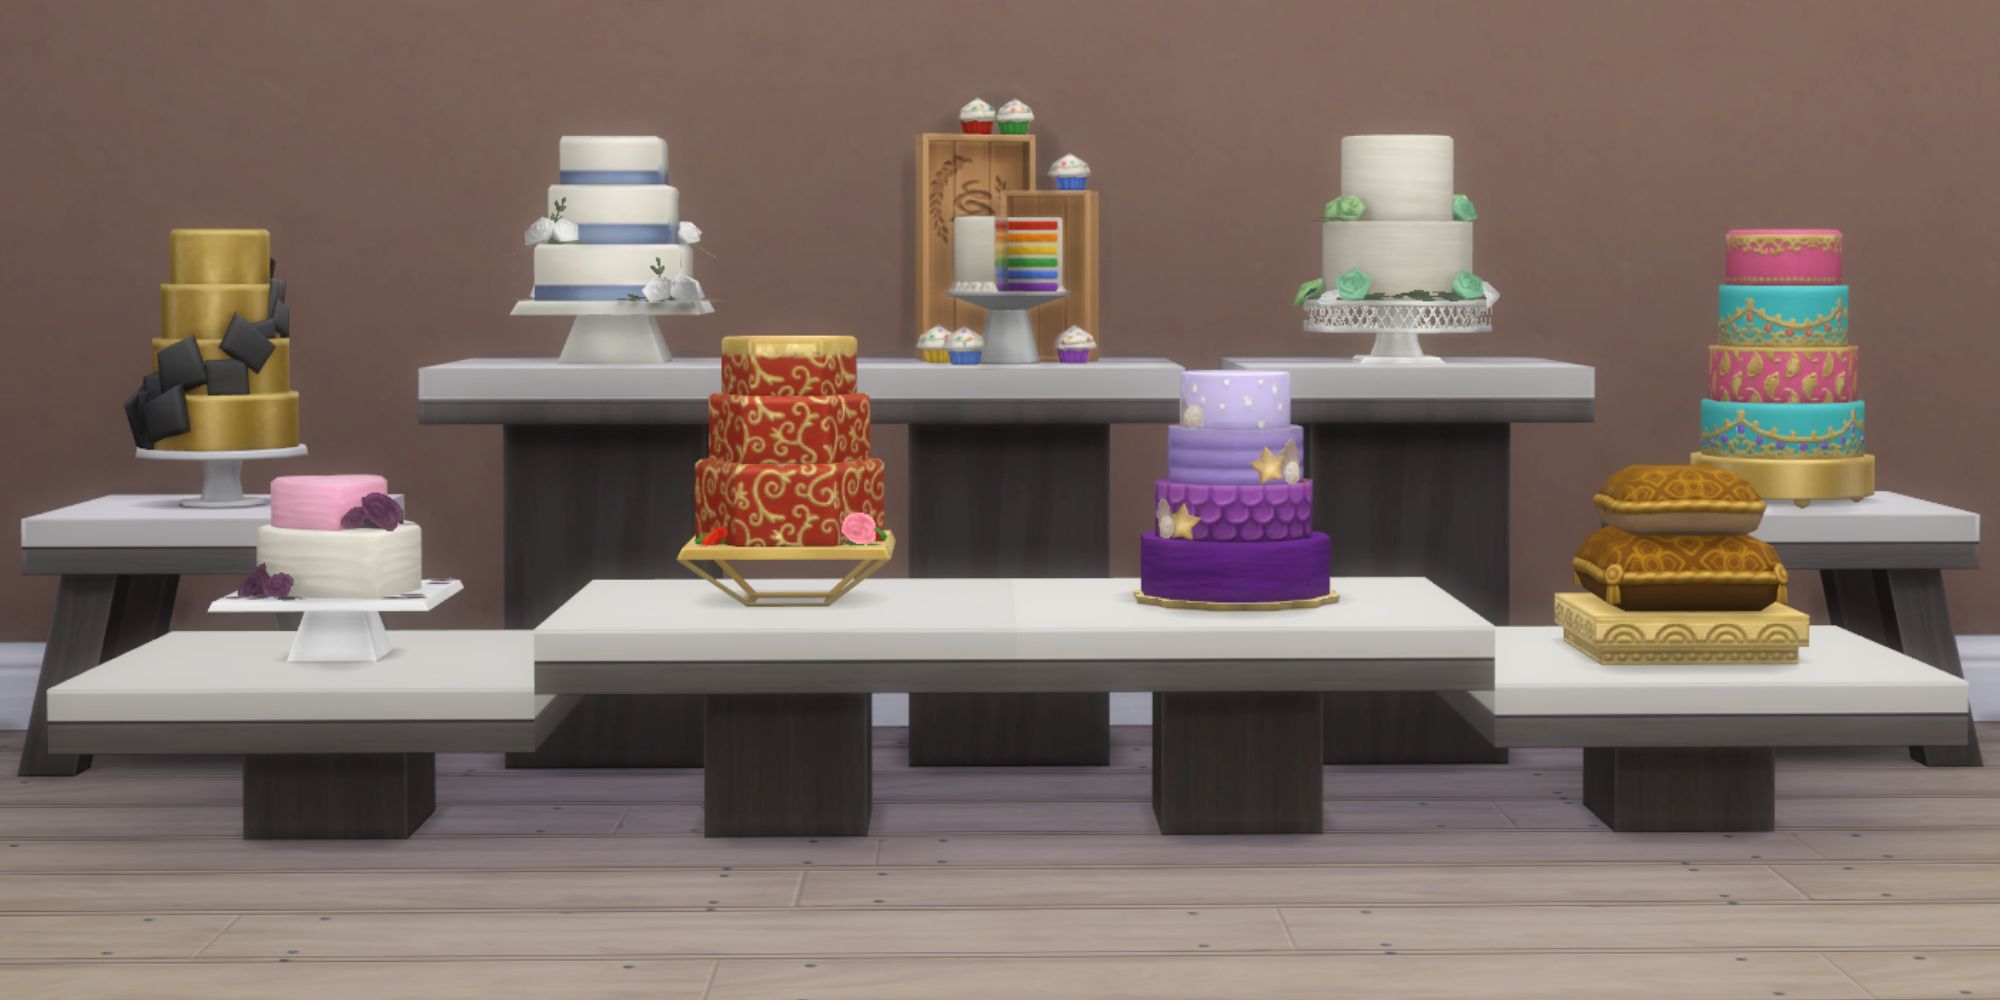 Sims 4 all wedding cake types on plynths in front of a wall